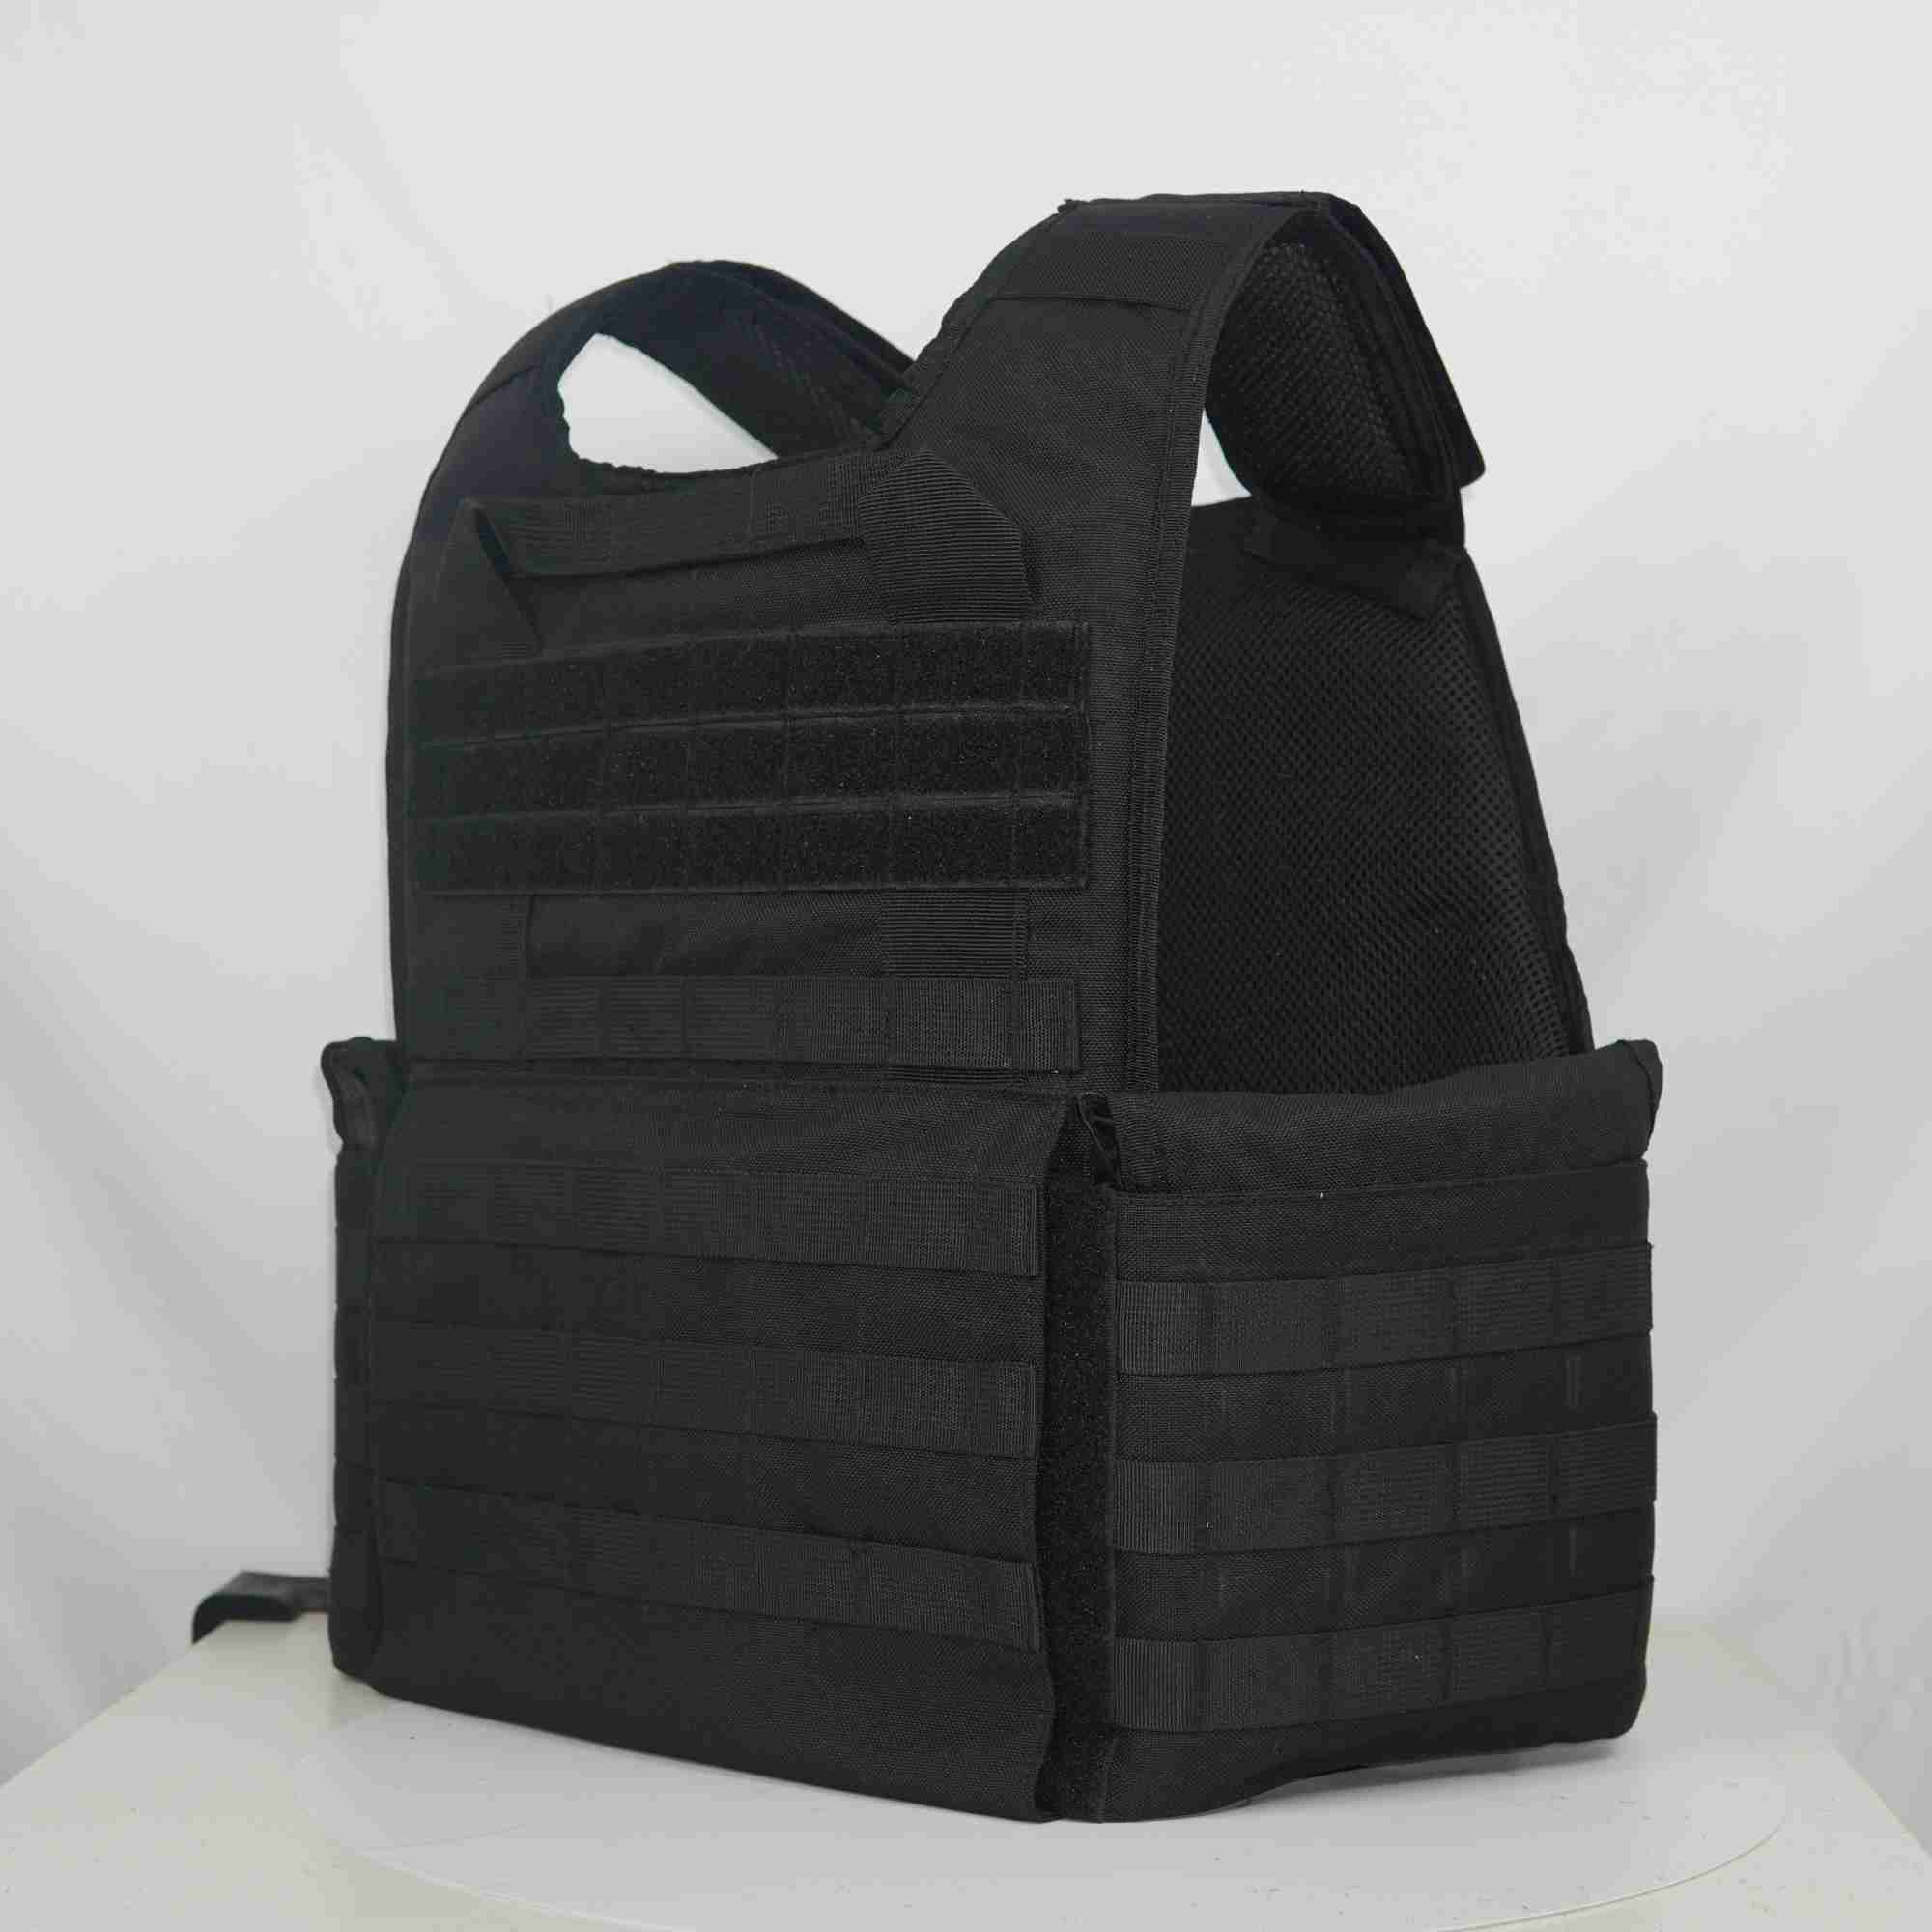 Black compatible tactical vest with Level IIIA protection by H Win